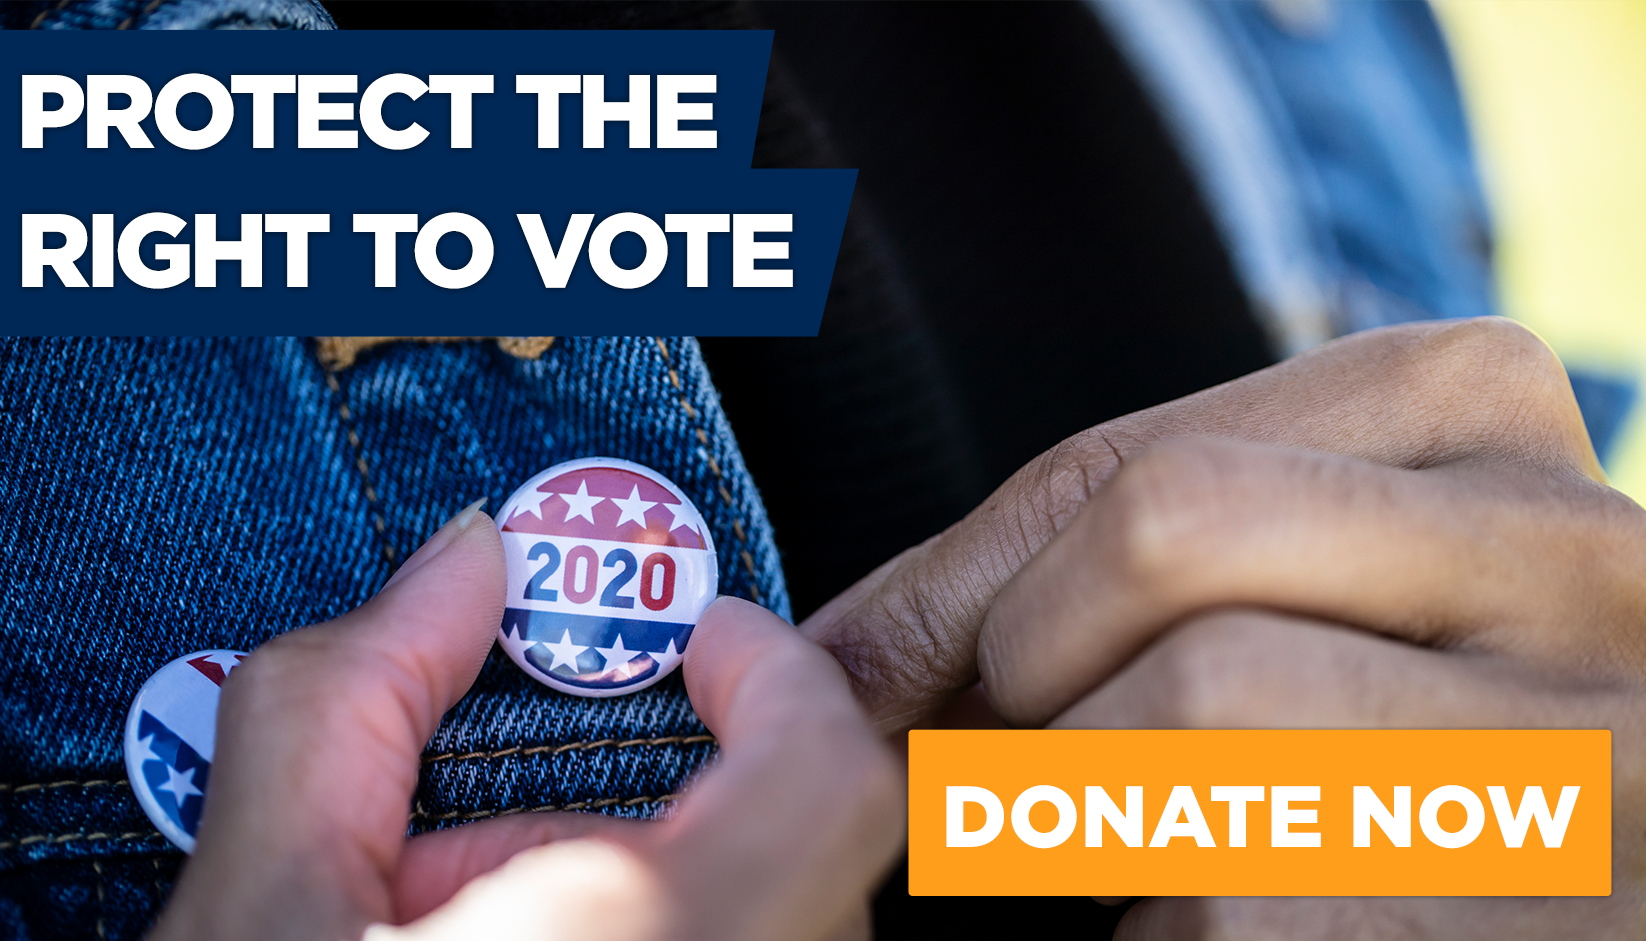 Protect the Right to Vote. Donate Now